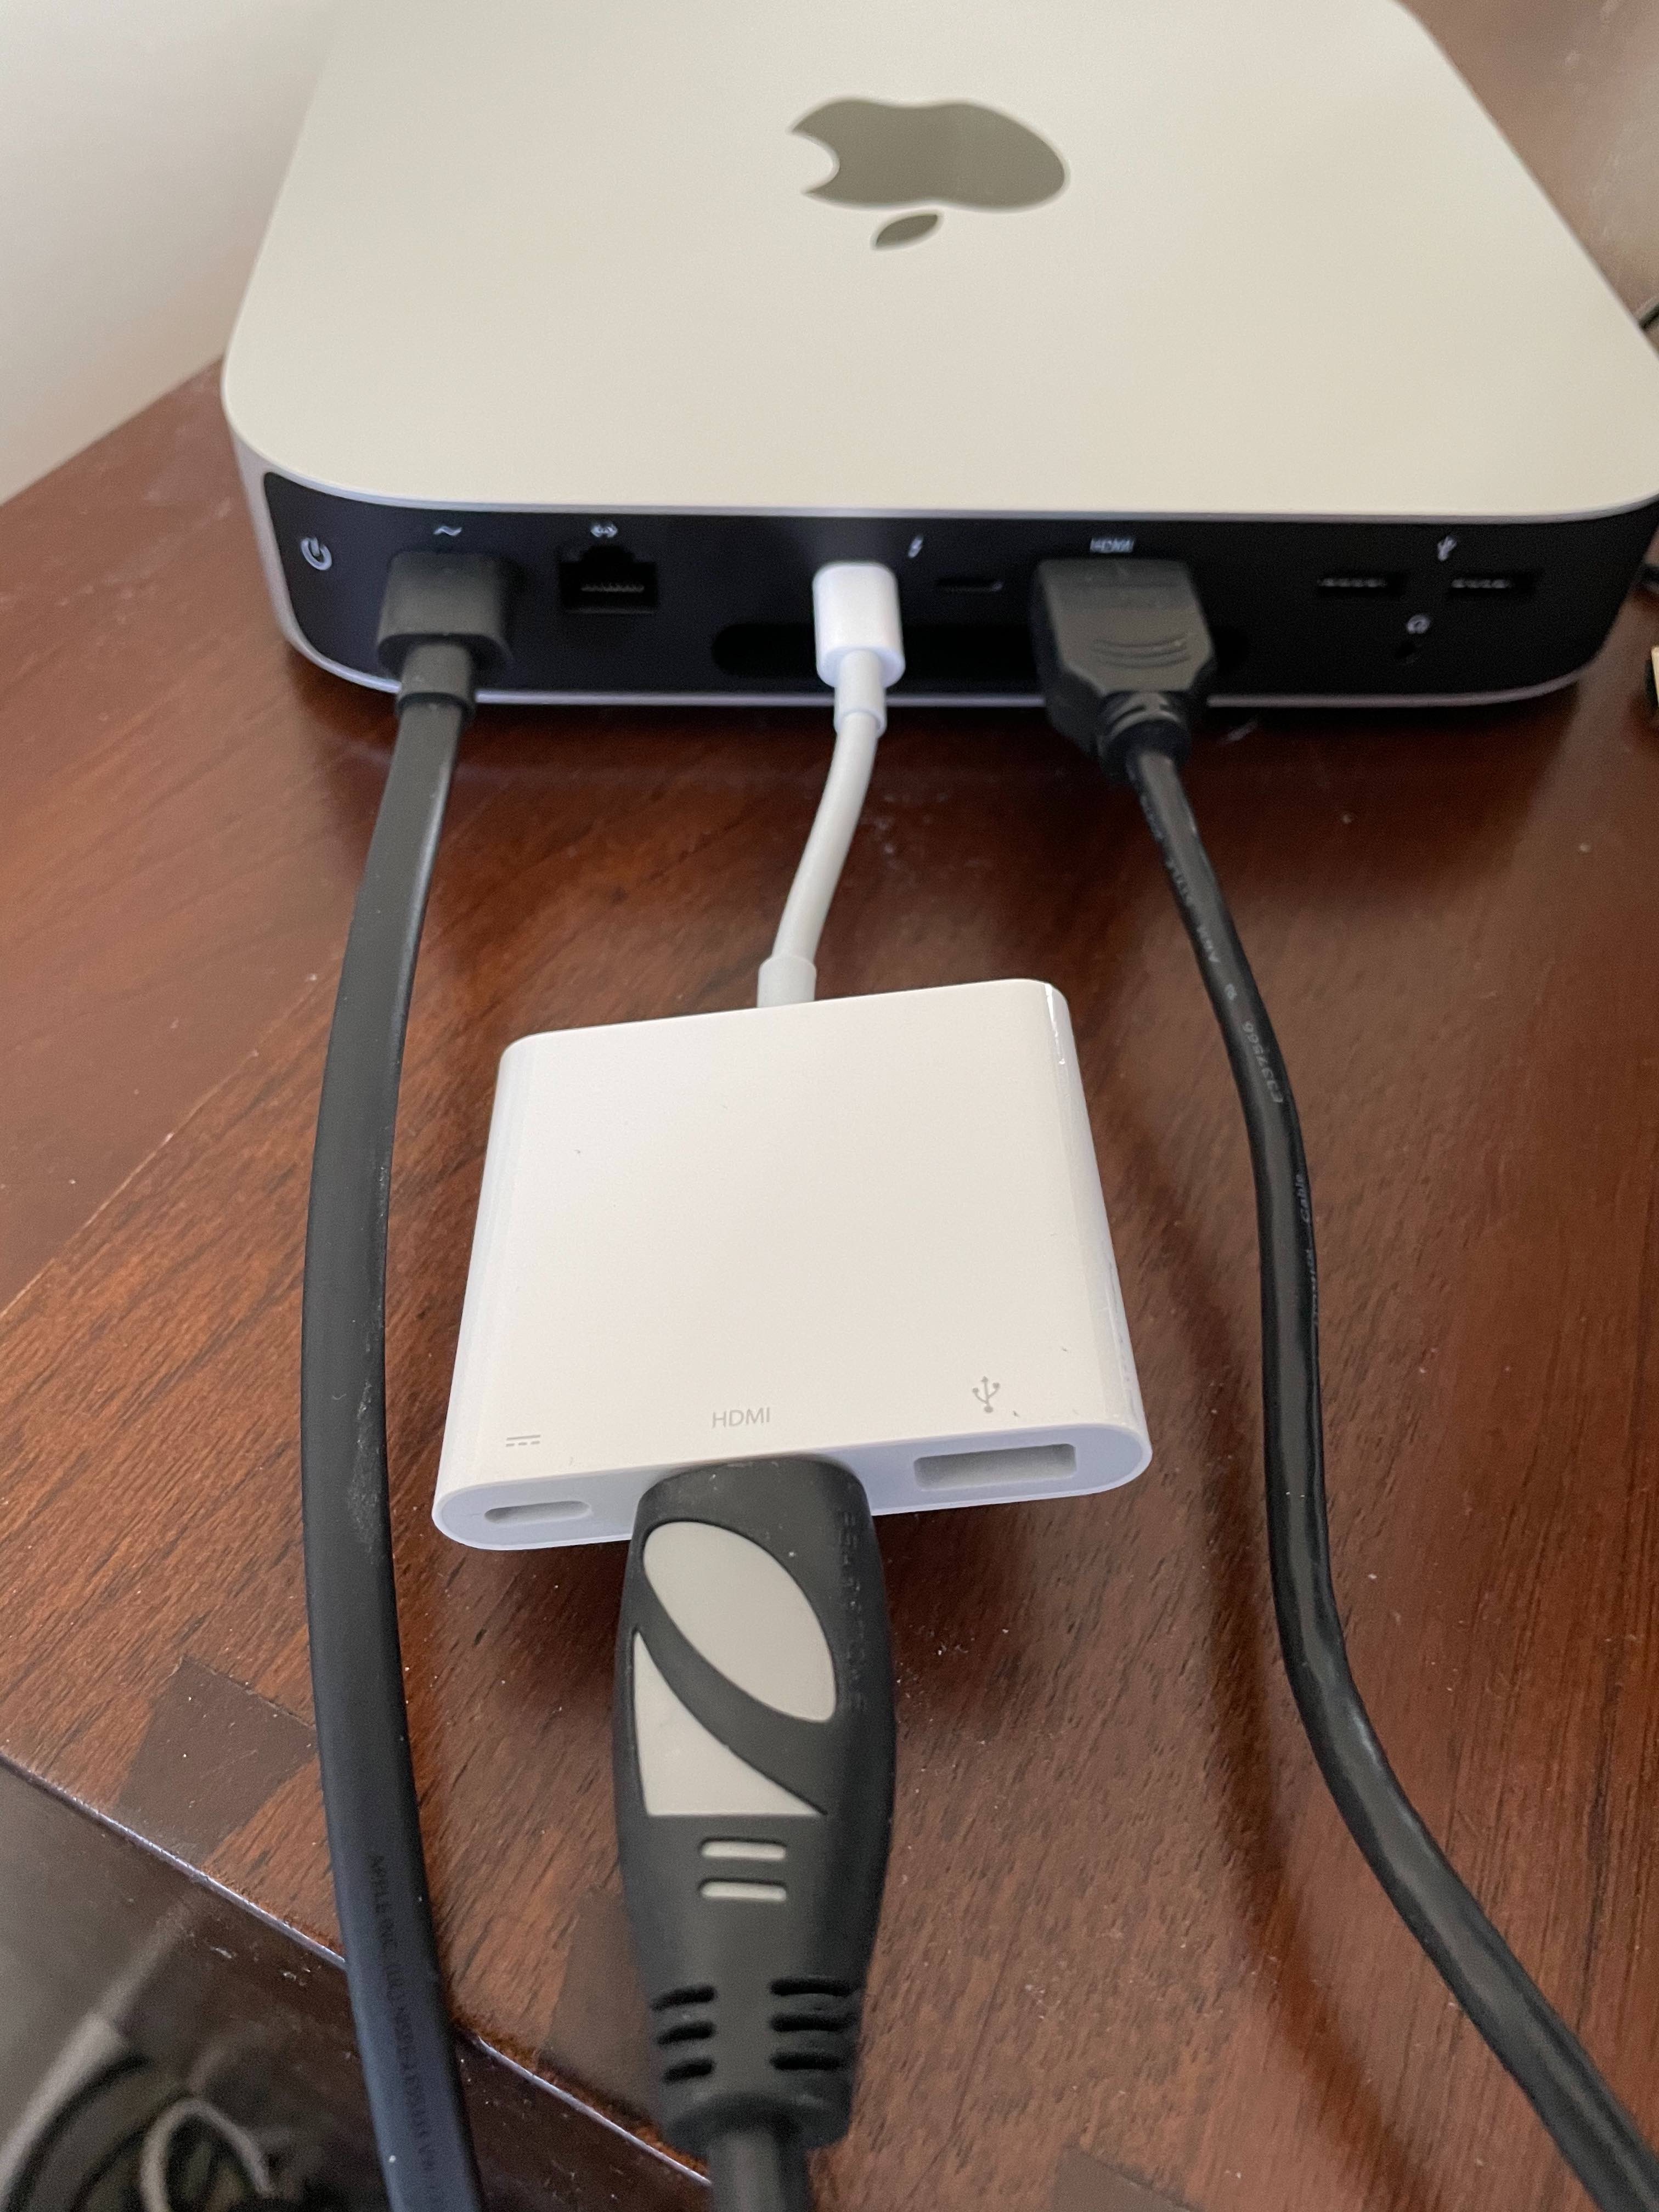 Users complain about Bluetooth connectivity issues with new M1 Mac mini -  9to5Mac